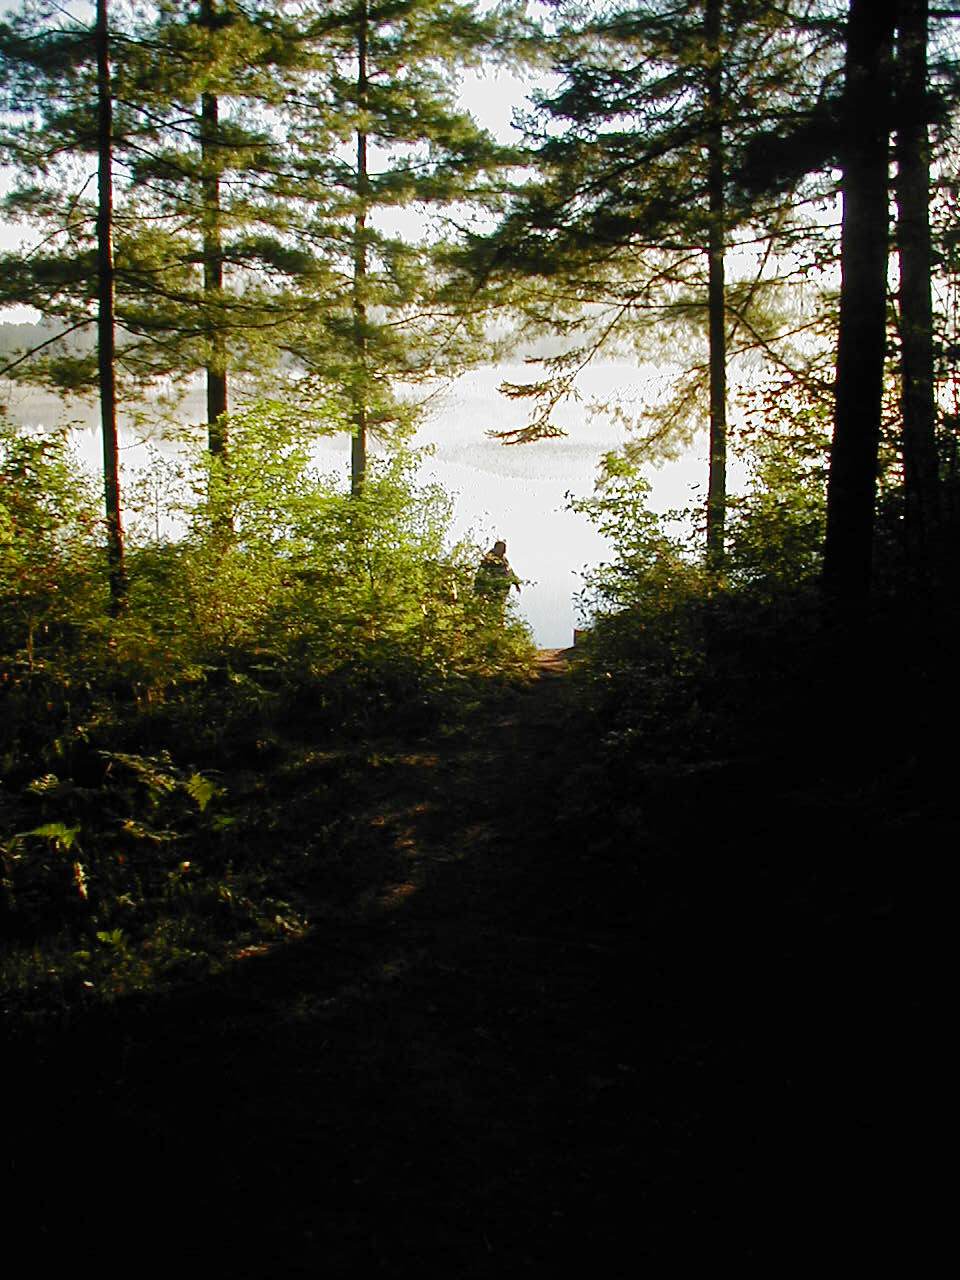 the view of the lake through the trees